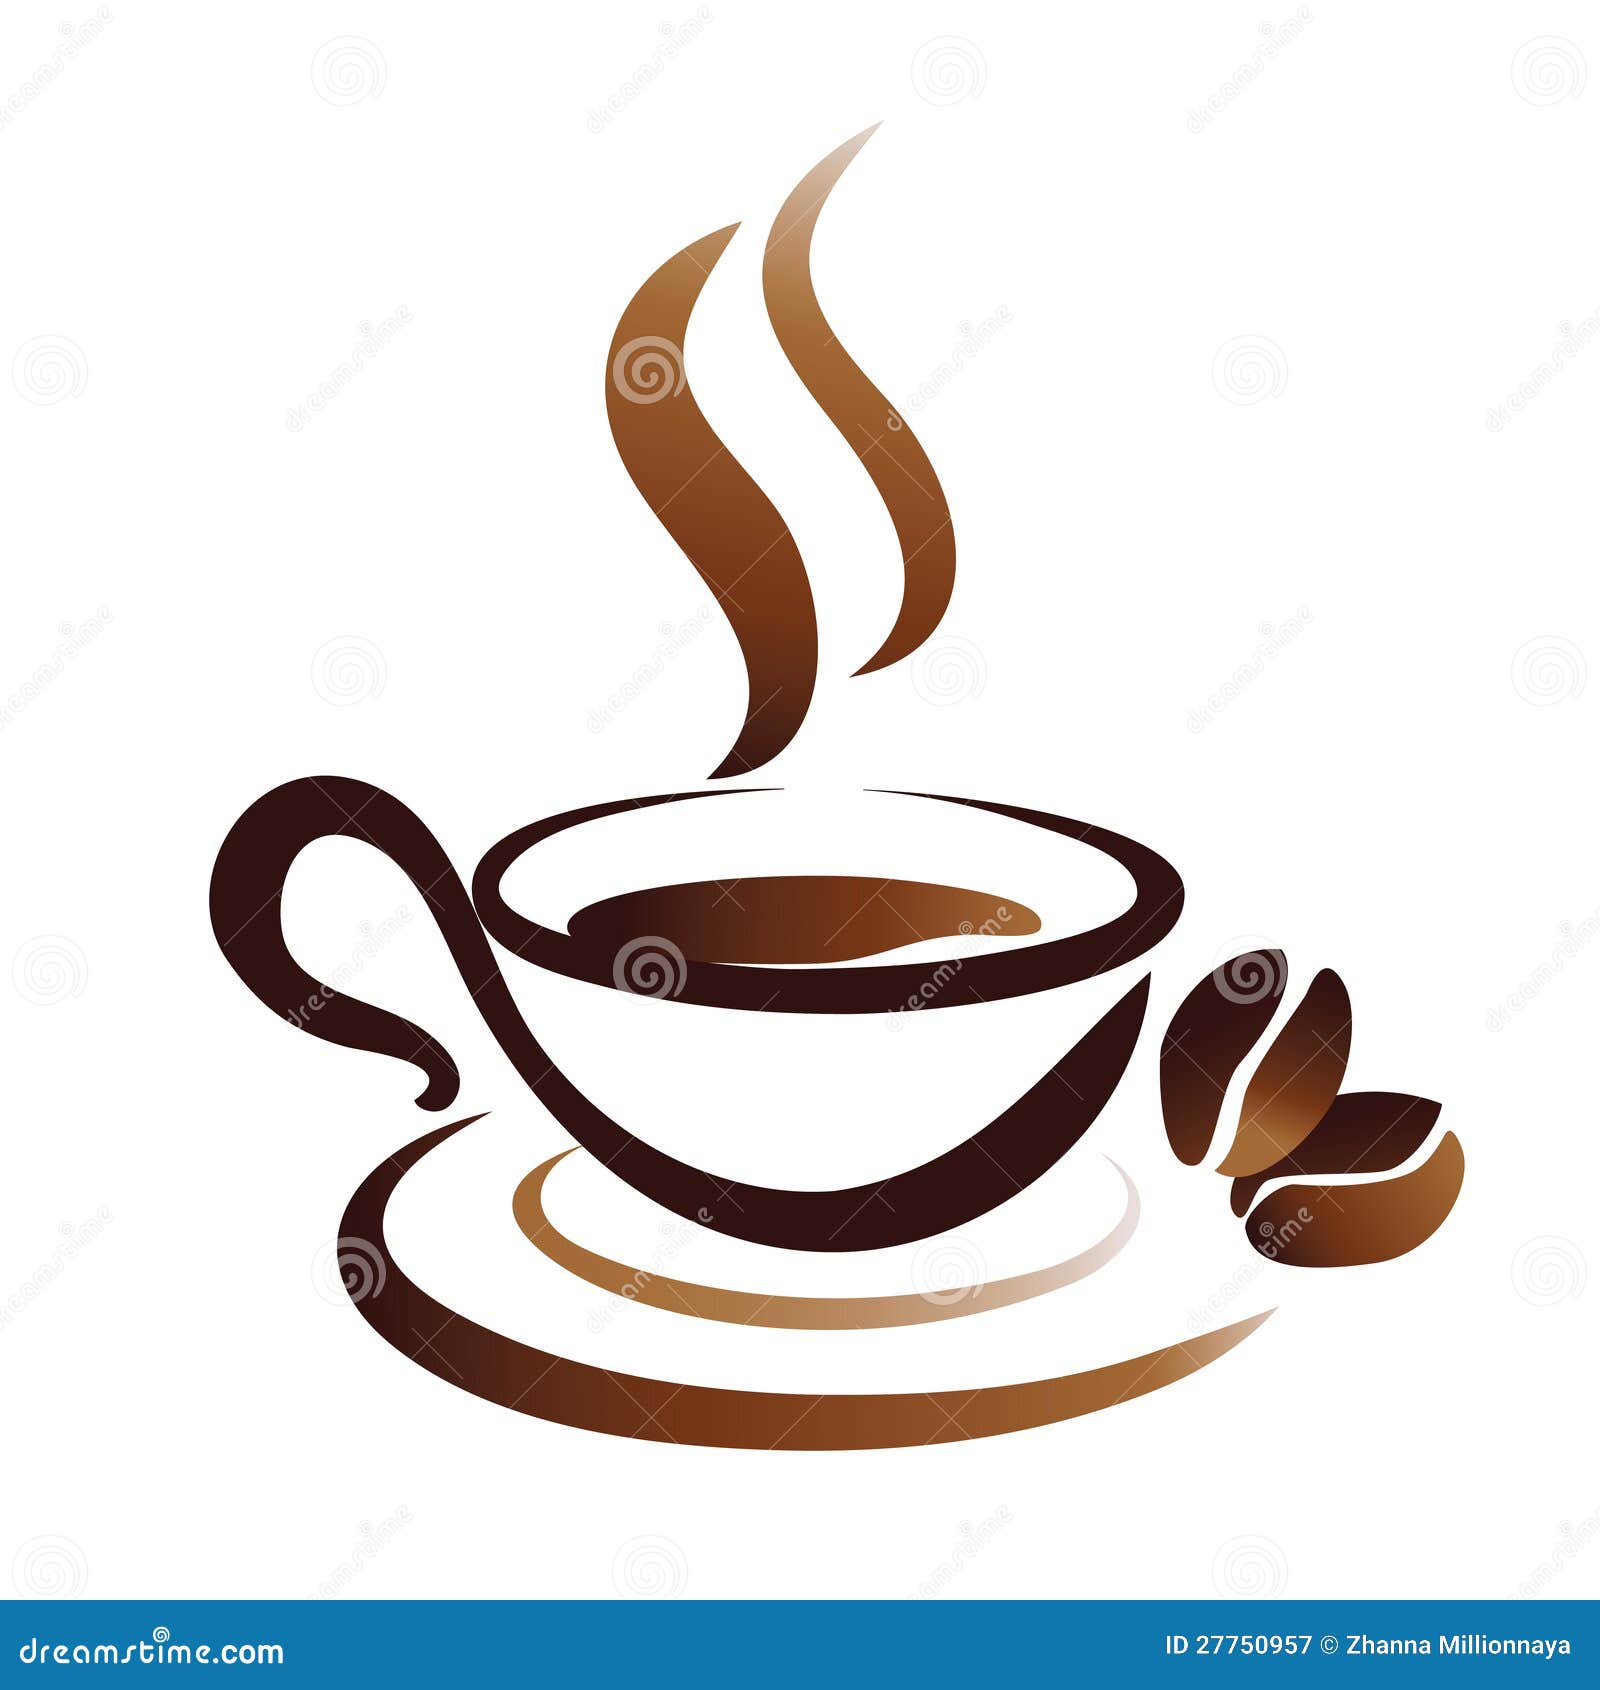 sketch of coffee cup, icon